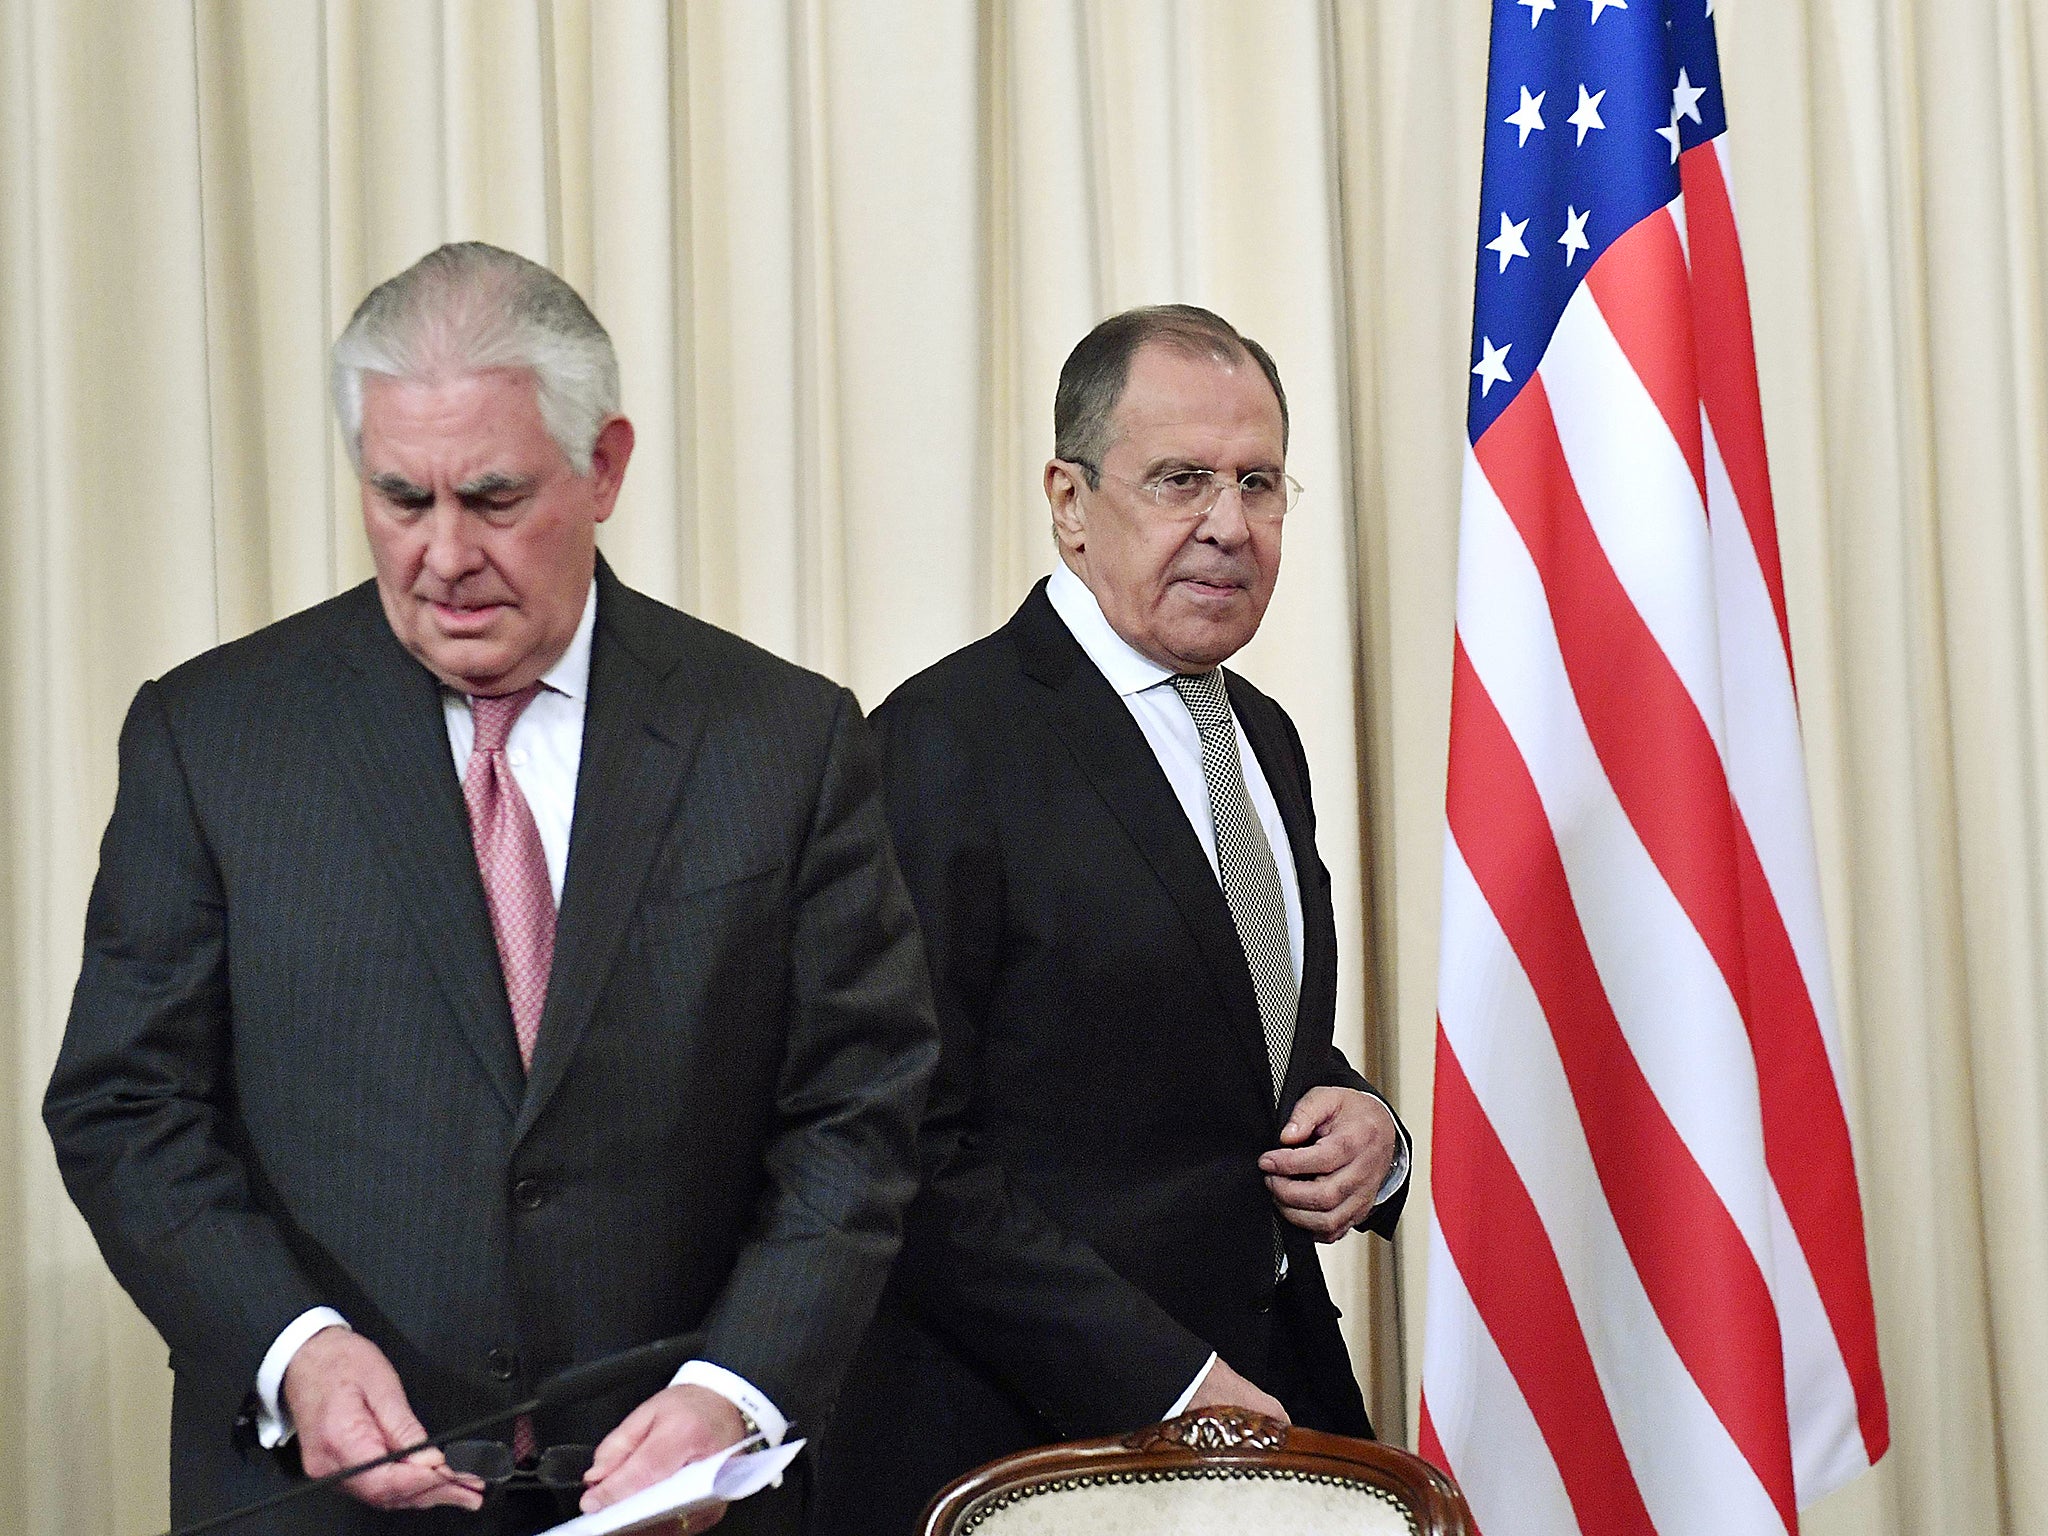 Lavrov (R) is in Washington to meet with US Secretary of State Rex Tillerson